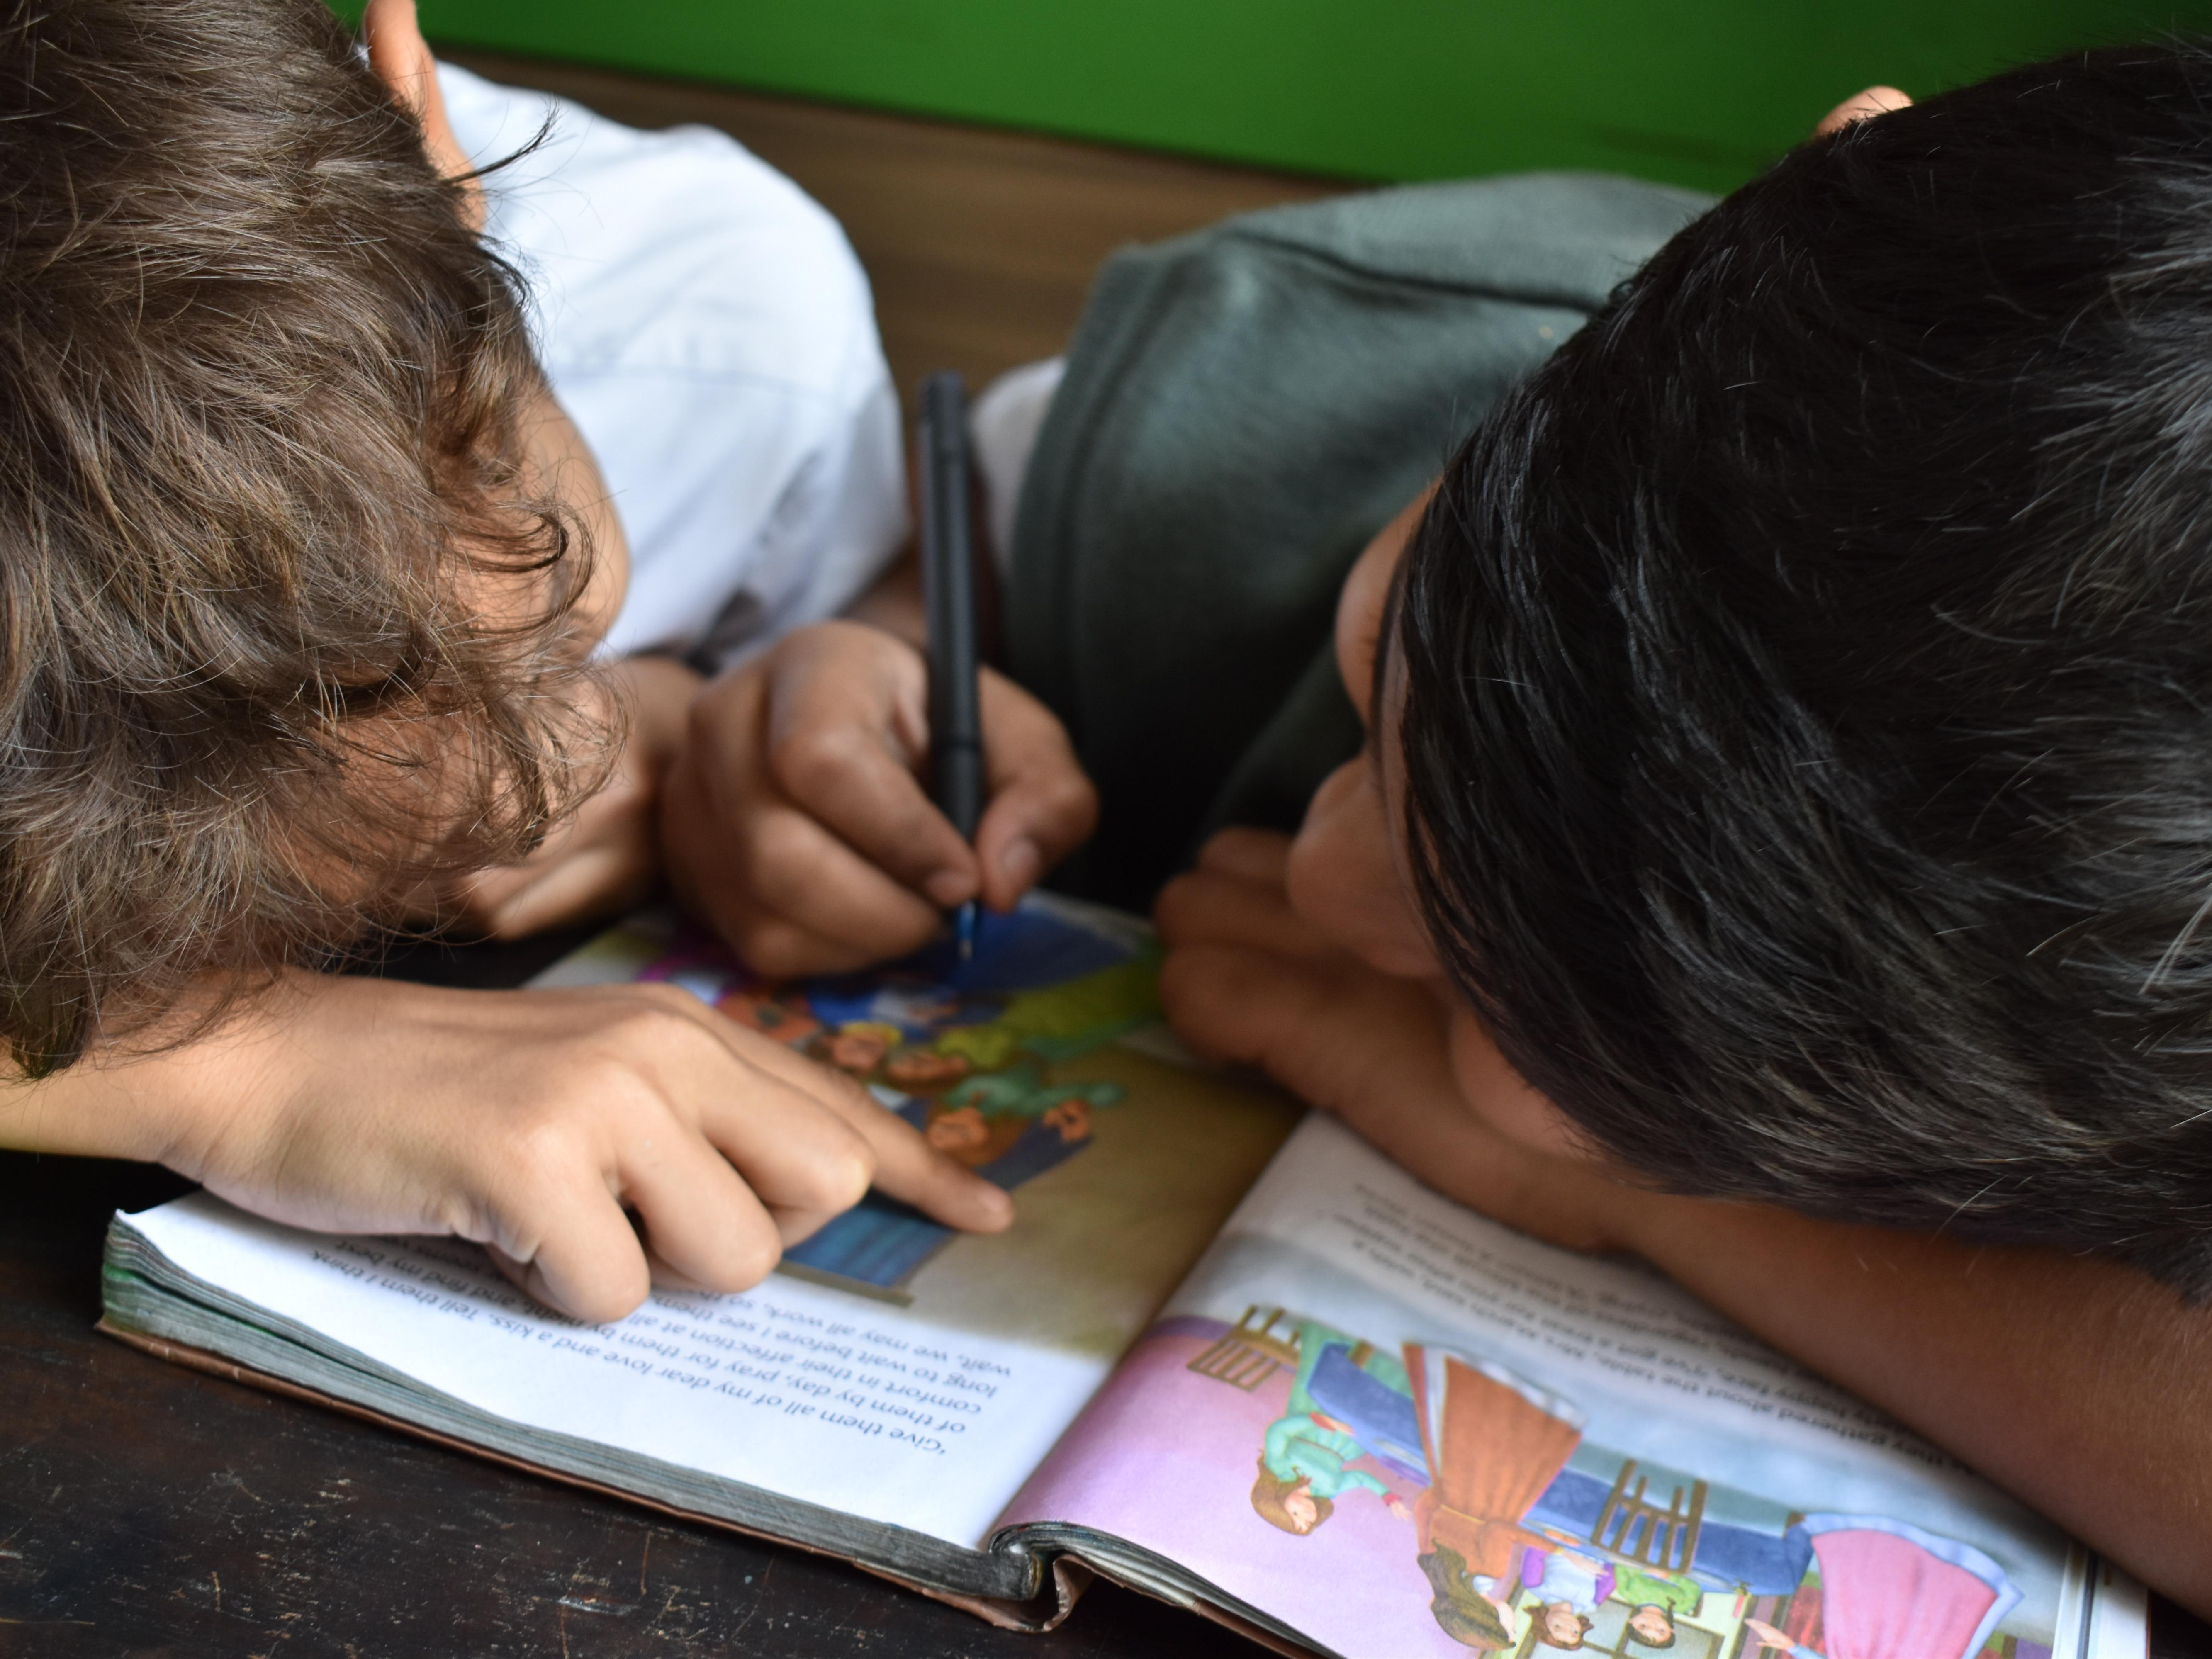 two children leaning over a book together, one using a pen